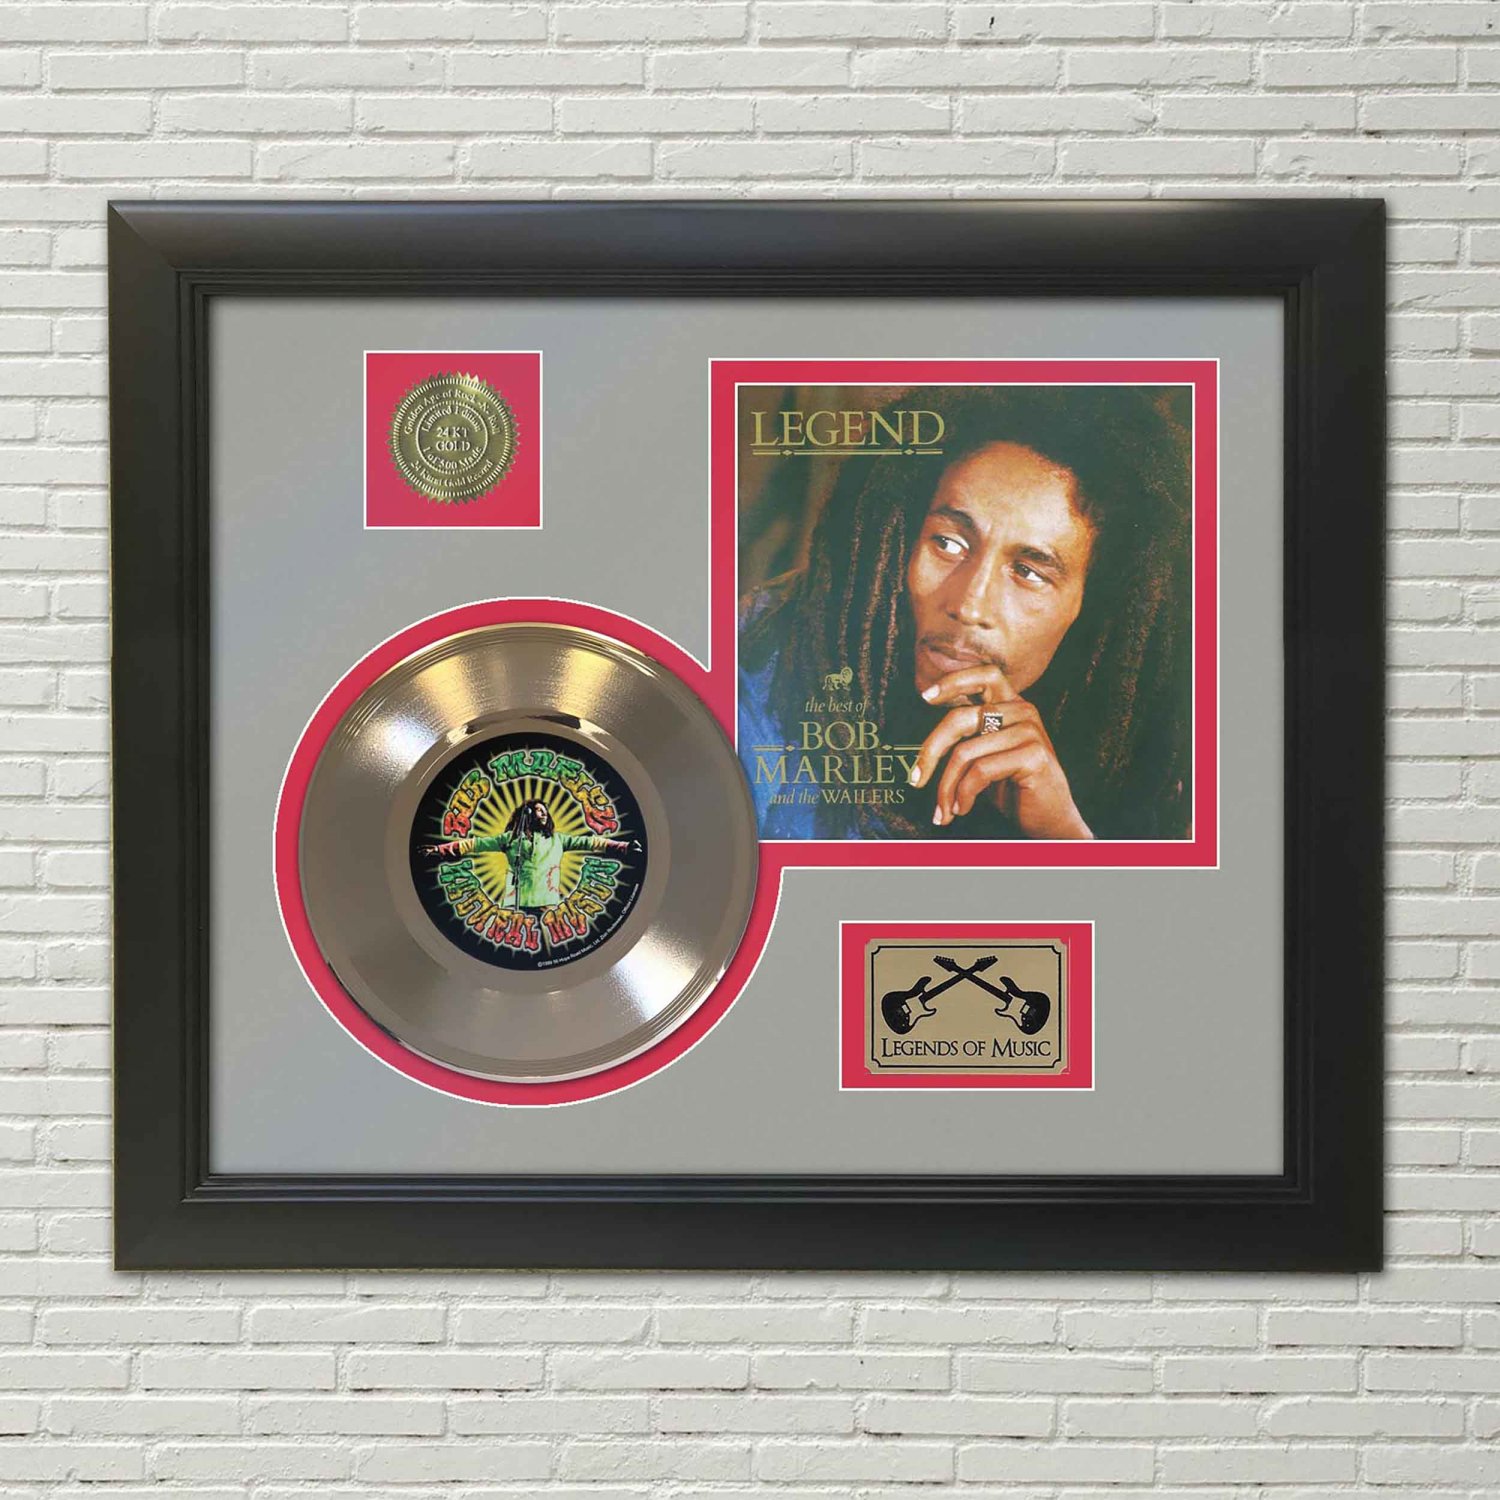 BOB MARLEY "Legend" Framed Picture Sleeve Gold 45 Record Display